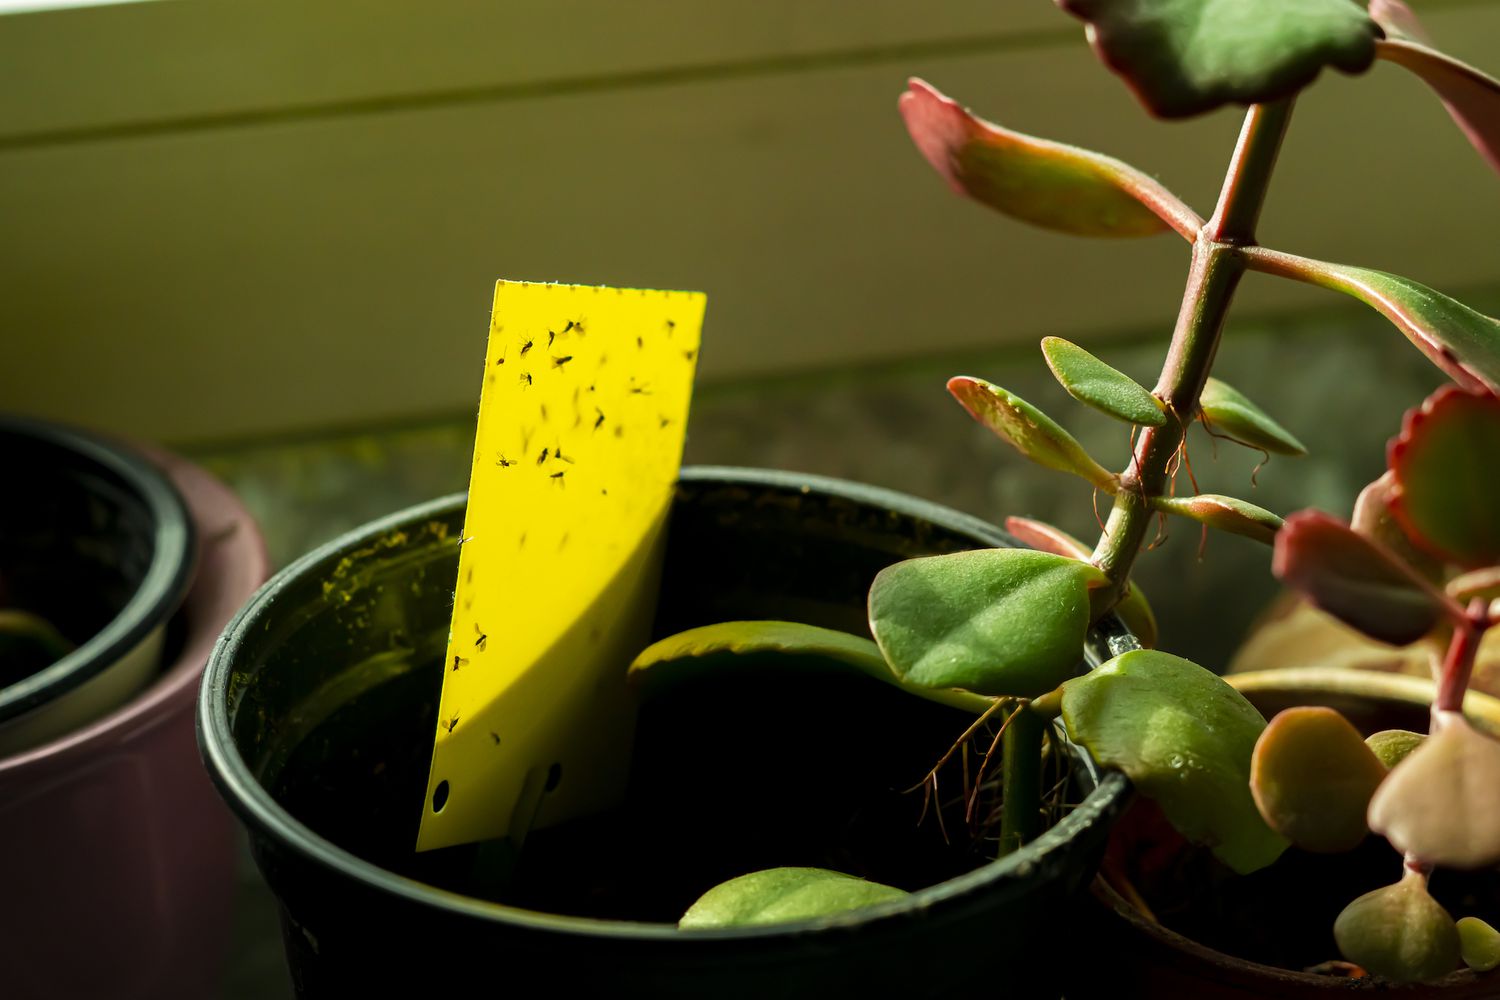 Housplant Pests, Fungus Gnats on Yellow Sticky Paper